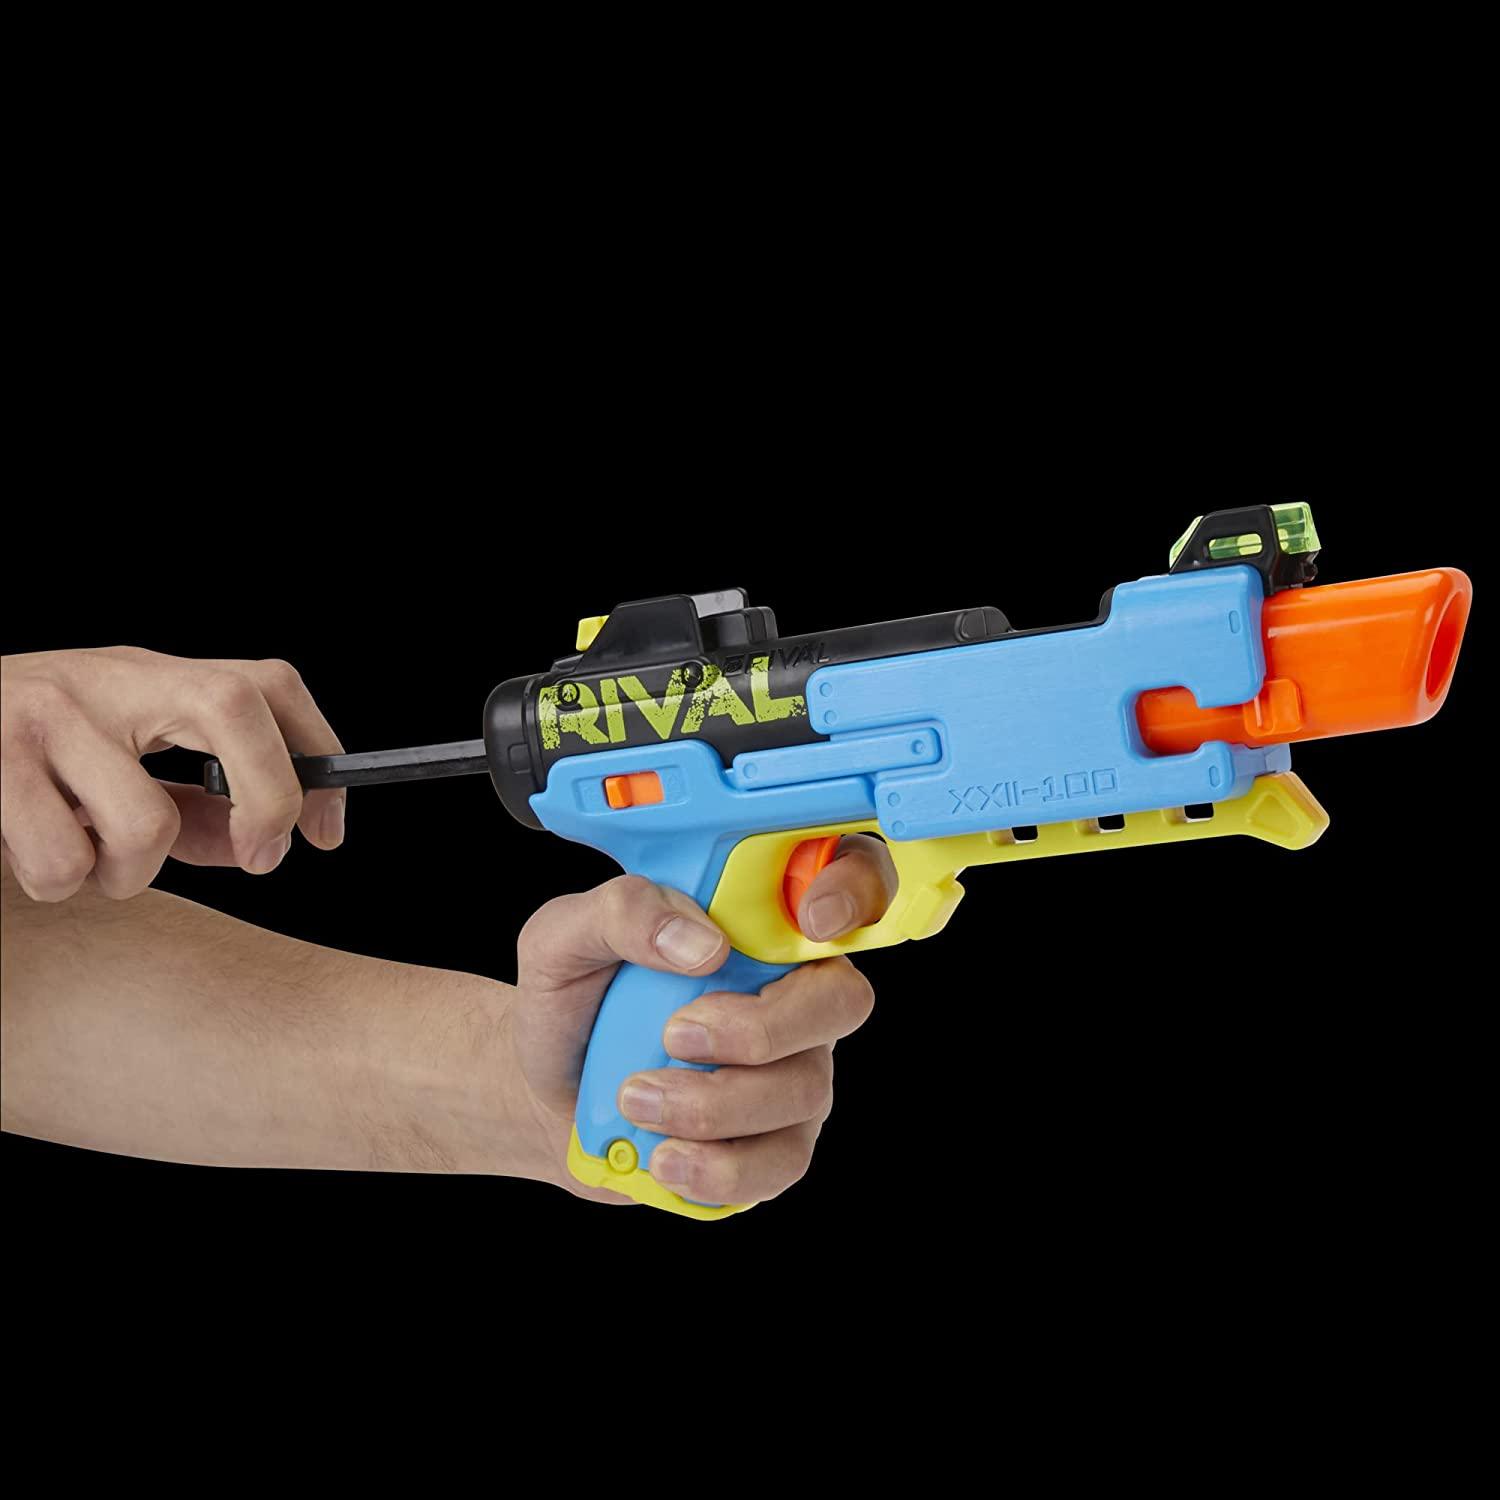 Nerf Rival Fate XXII-100 Blaster, Most Accurate Nerf Rival System, Adjustable Rear Sight, Breech Load, Includes 3 Nerf Rival Accu-Rounds - FunCorp India